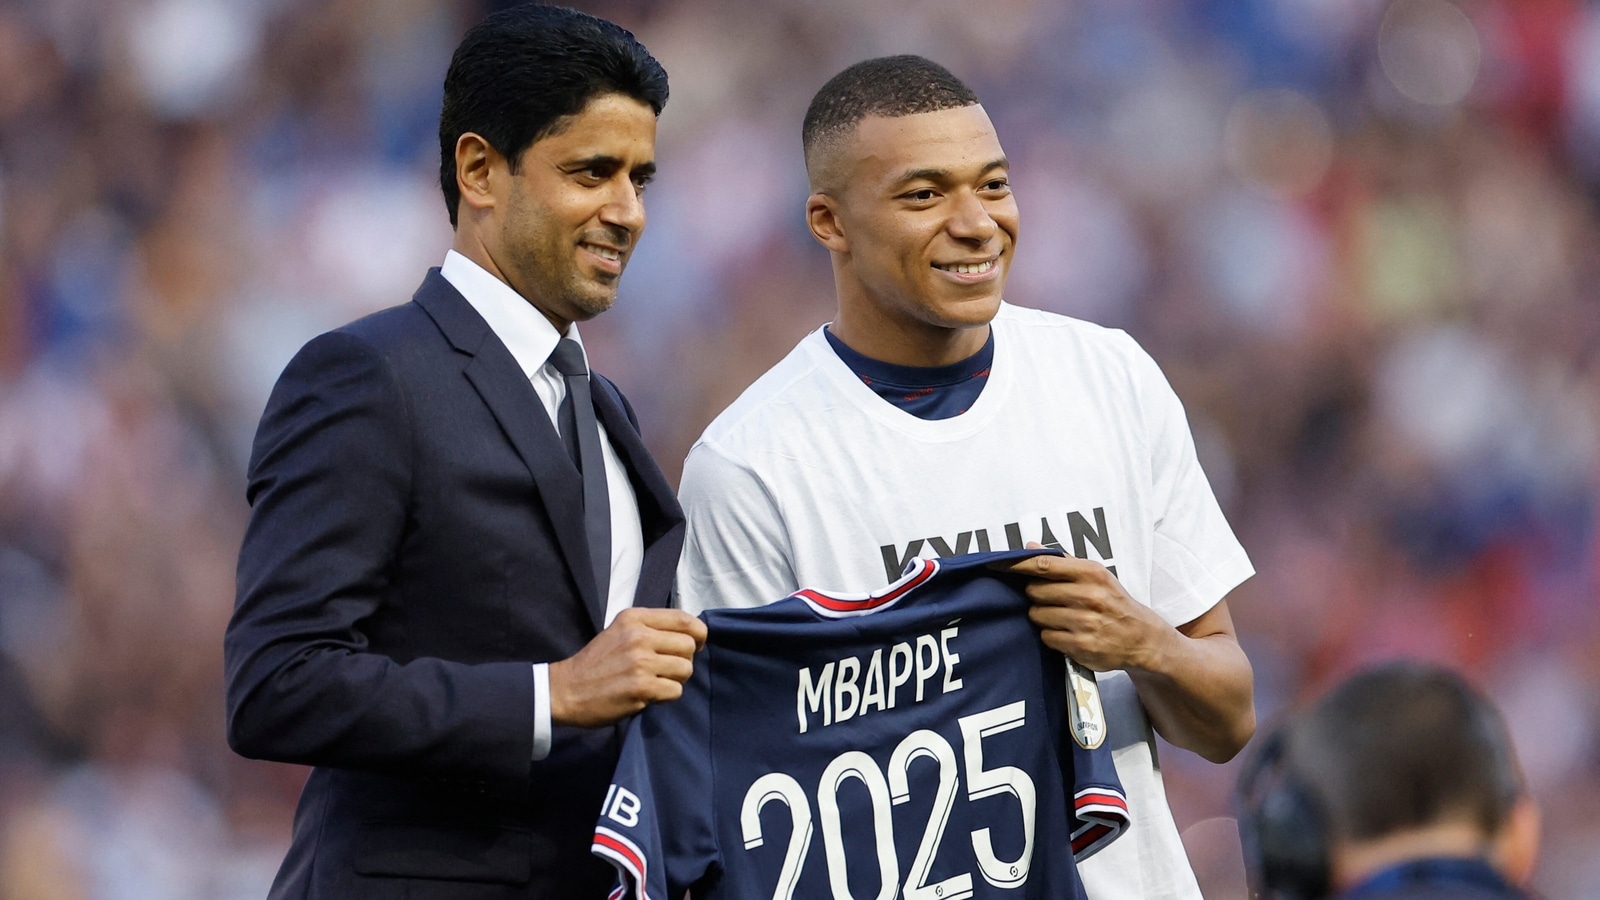 Spanish league to file complaint over PSG’s new Mbappe deal